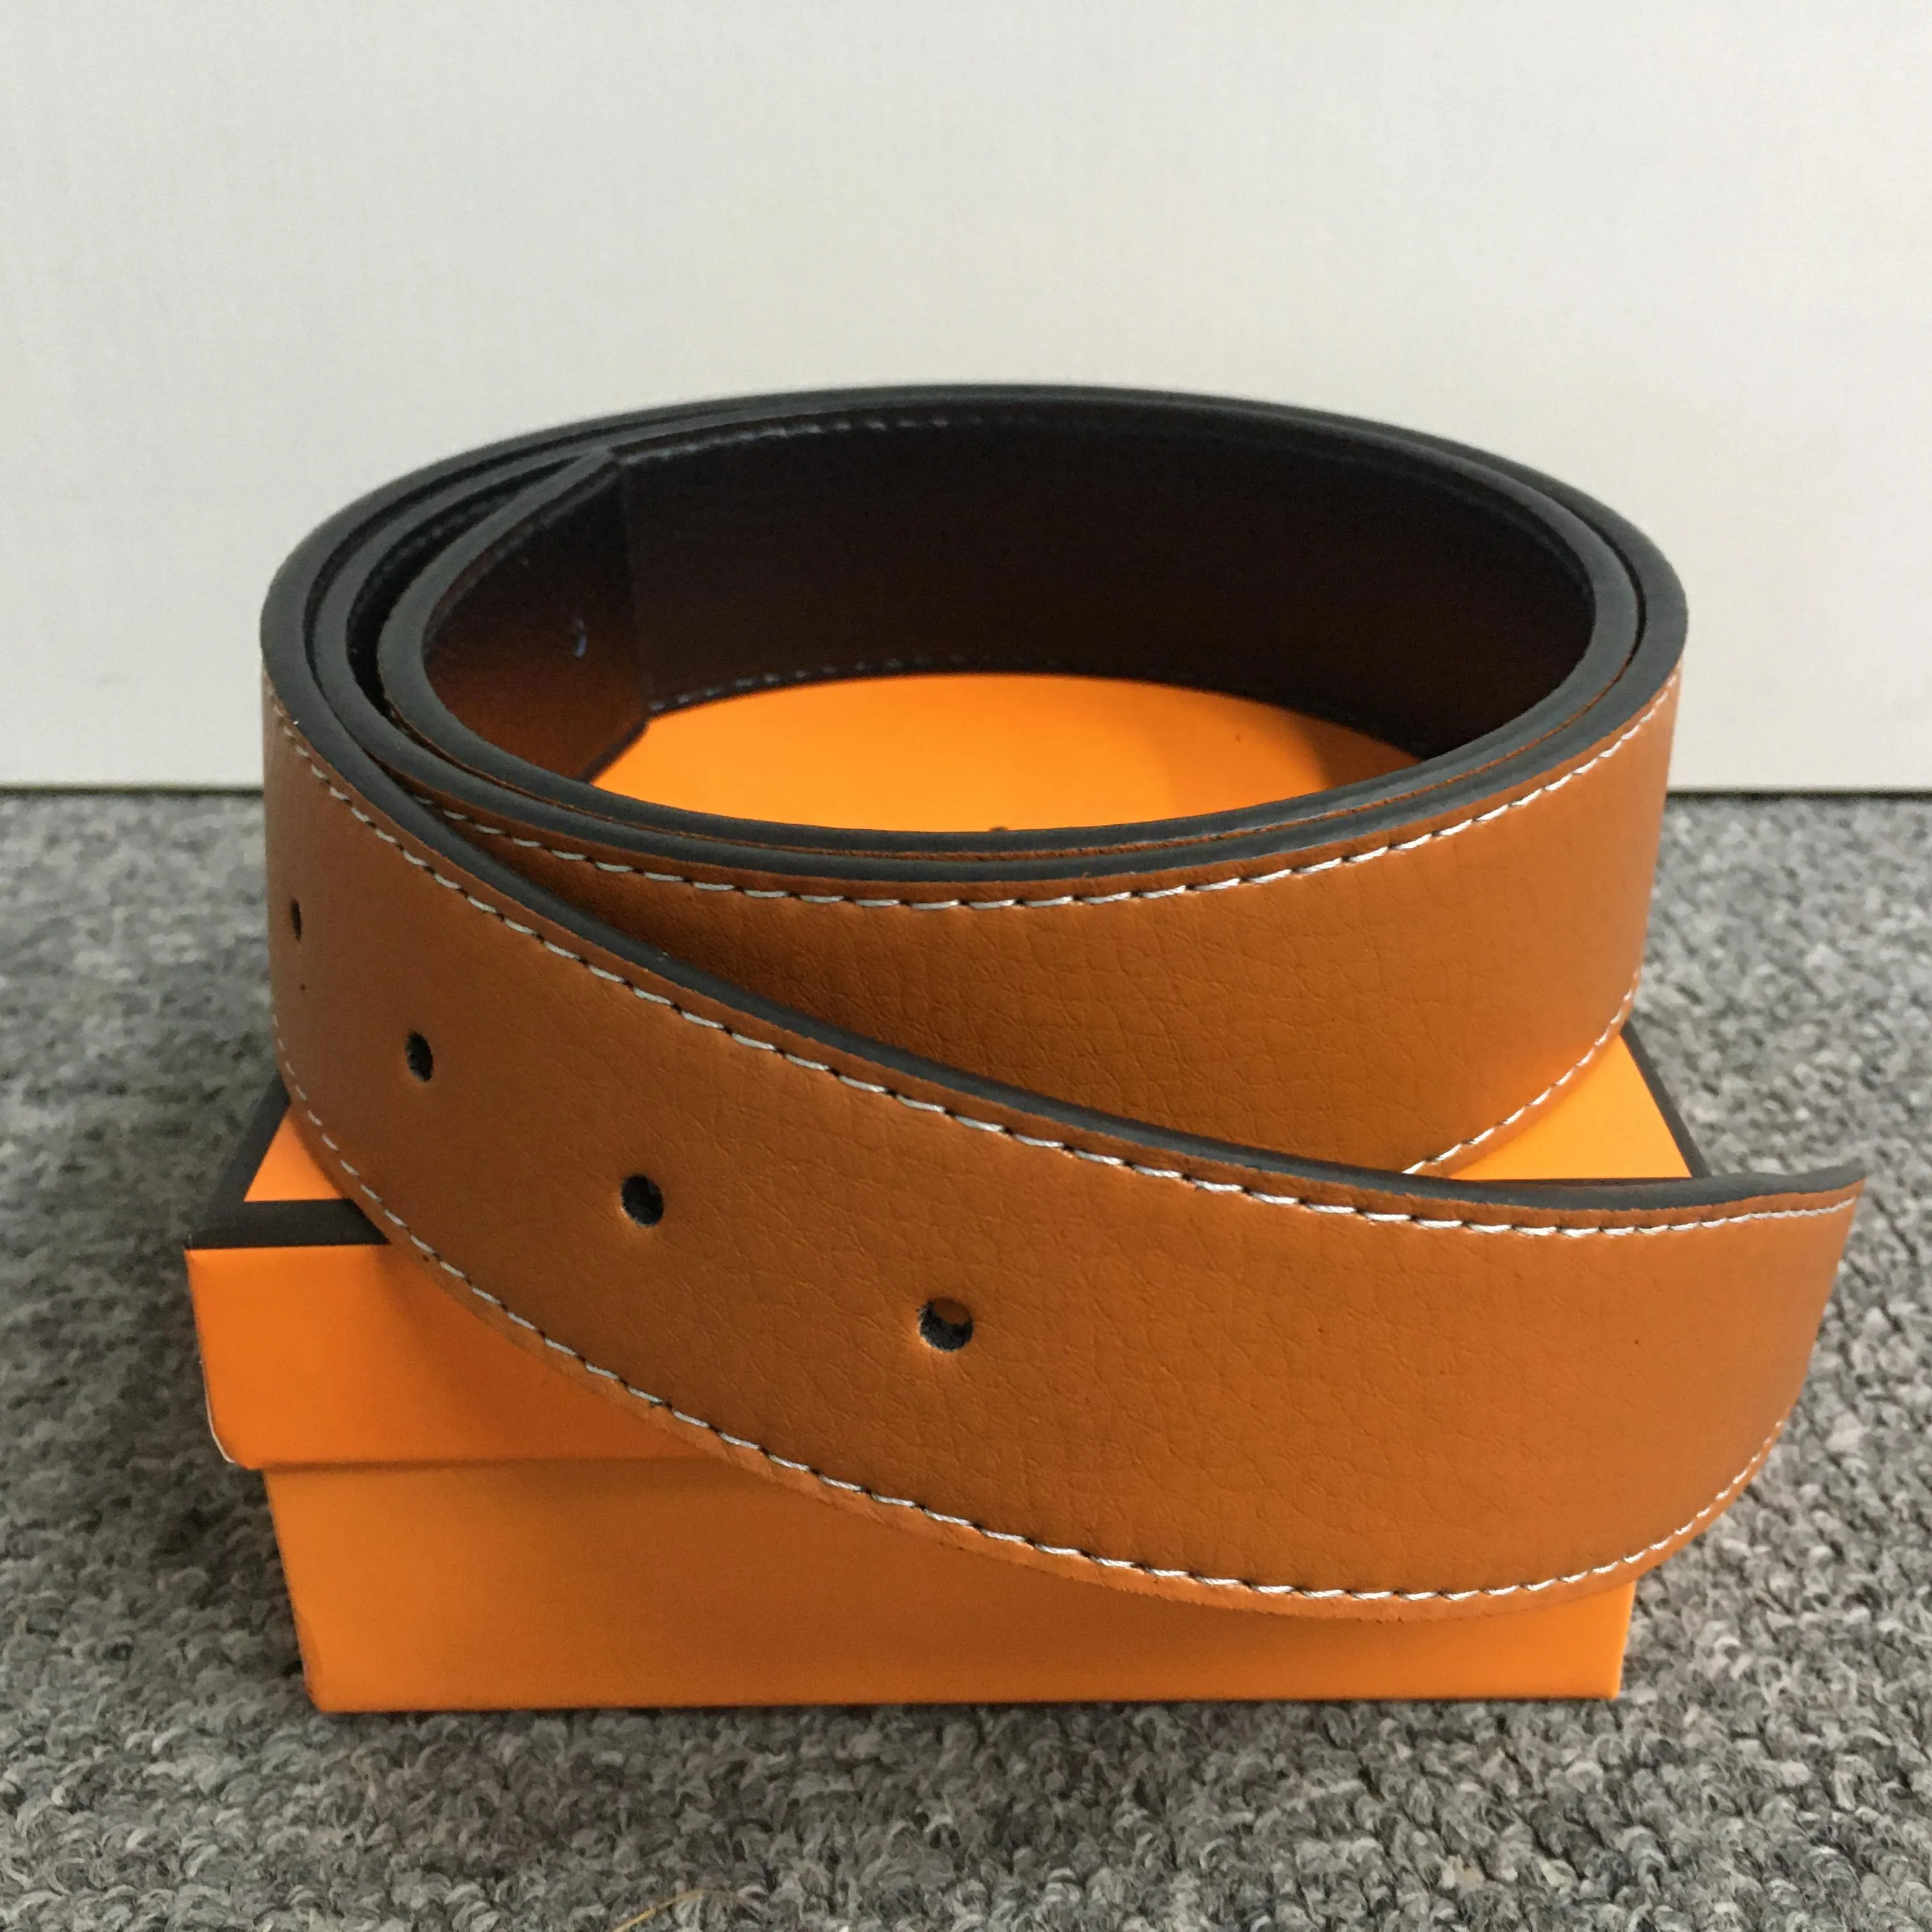 waistband Belts Men Women Belts of Mens and Women Belt with Fashion Big Buckle Real Leather Top High Quality231P